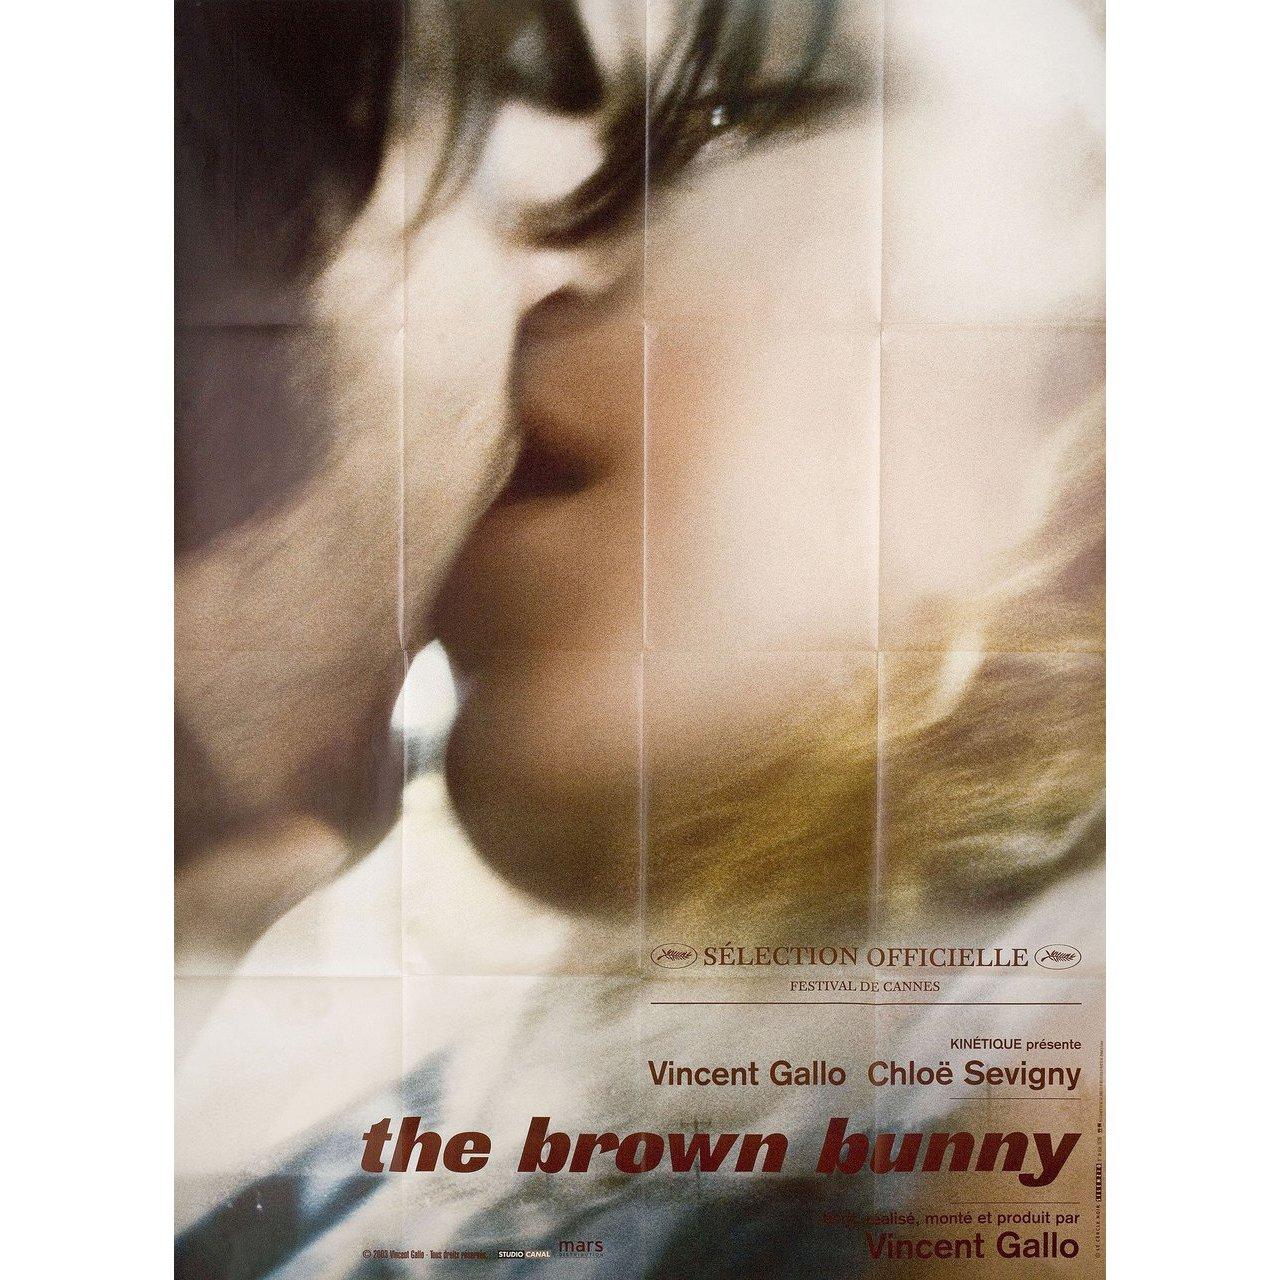 Original 2003 French grande poster for the film The Brown Bunny directed by Vincent Gallo with Vincent Gallo / Chloe Sevigny / Cheryl Tiegs / Elizabeth Blake. Fine condition, folded. Many original posters were issued folded or were subsequently